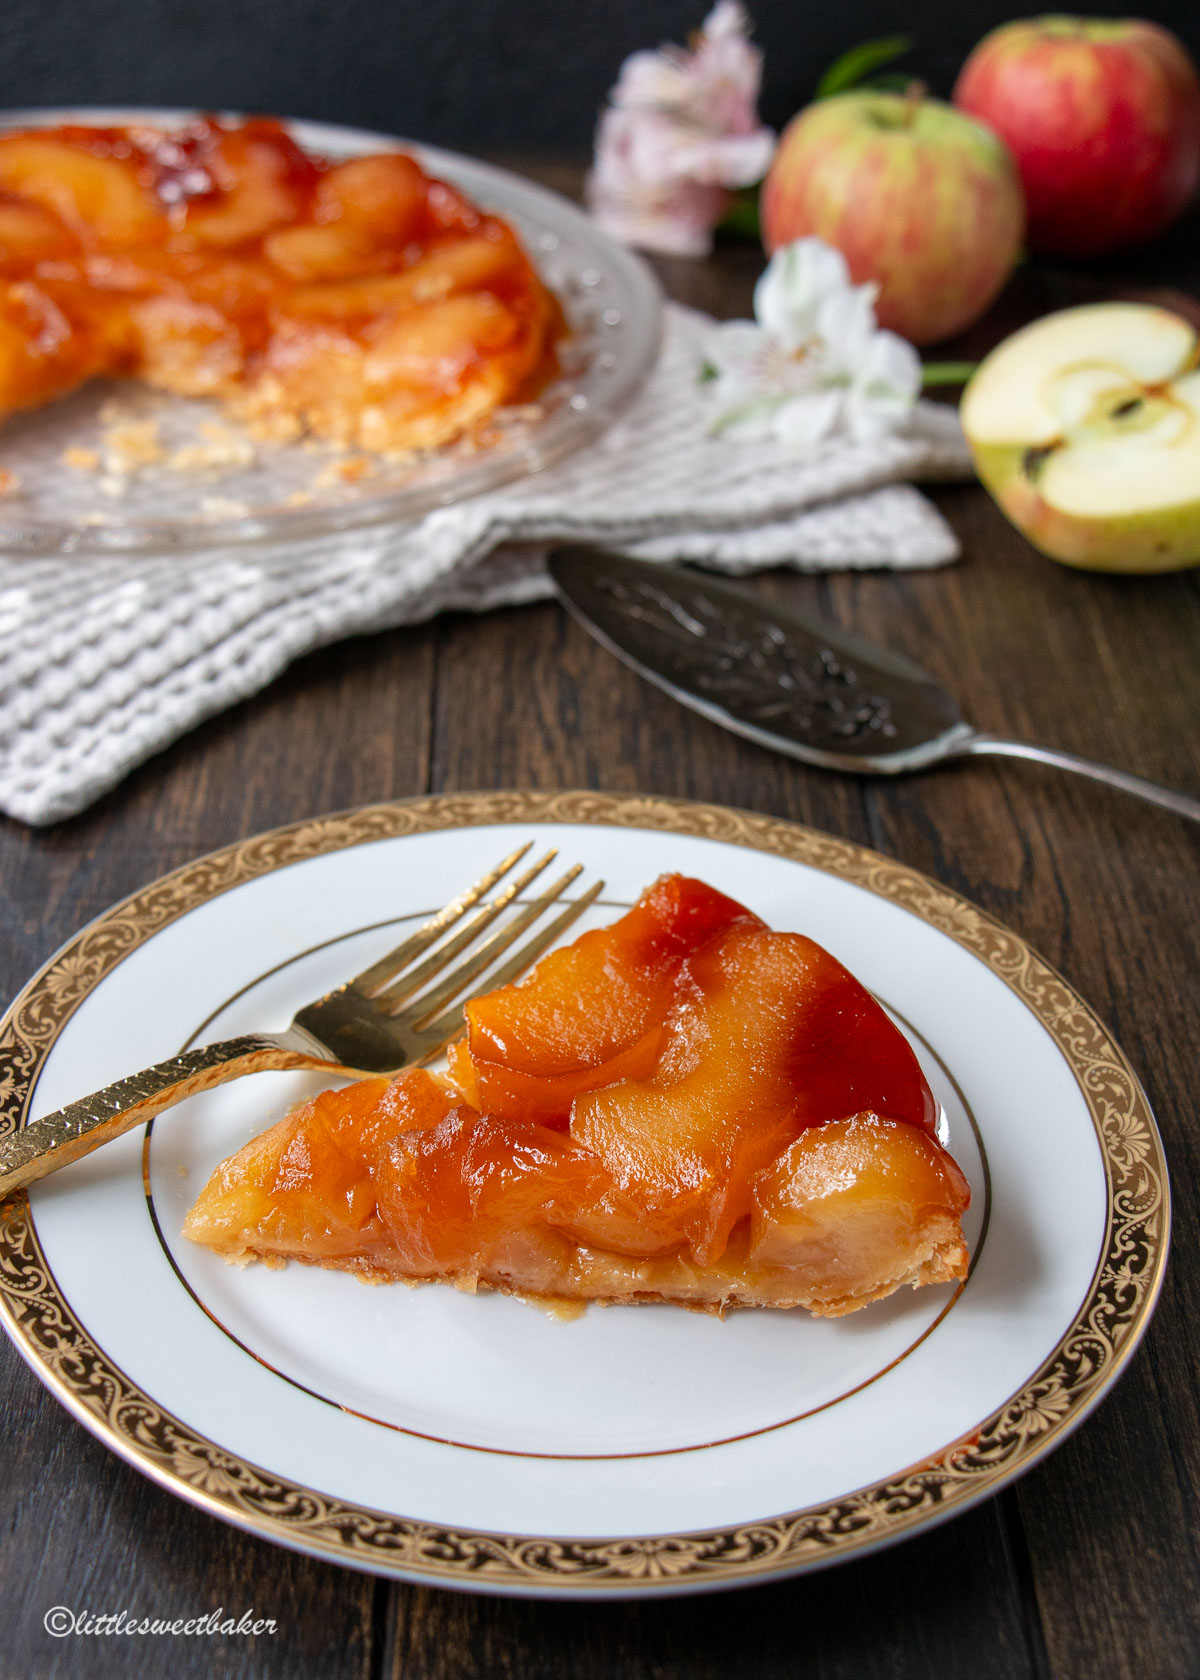 Tarte Tatin Recipe (With Apples and Buttery Crust)